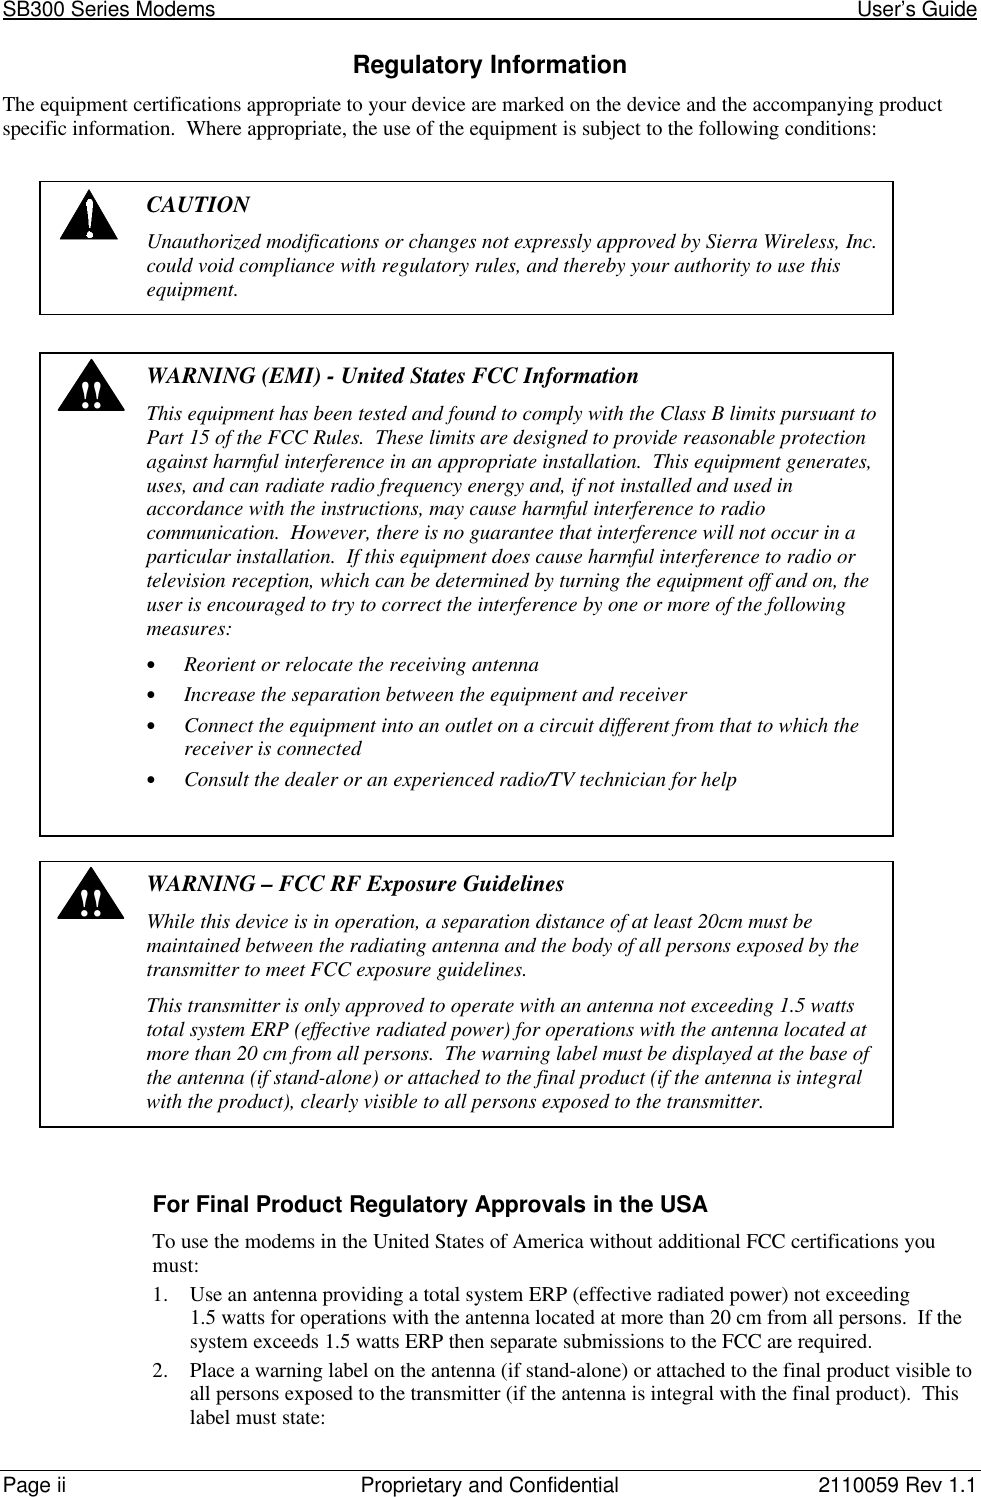 SB300 Series Modems                                                                                                            User’s GuidePage ii Proprietary and Confidential 2110059 Rev 1.1Regulatory InformationThe equipment certifications appropriate to your device are marked on the device and the accompanying productspecific information.  Where appropriate, the use of the equipment is subject to the following conditions:CAUTIONUnauthorized modifications or changes not expressly approved by Sierra Wireless, Inc.could void compliance with regulatory rules, and thereby your authority to use thisequipment.!!WARNING (EMI) - United States FCC InformationThis equipment has been tested and found to comply with the Class B limits pursuant toPart 15 of the FCC Rules.  These limits are designed to provide reasonable protectionagainst harmful interference in an appropriate installation.  This equipment generates,uses, and can radiate radio frequency energy and, if not installed and used inaccordance with the instructions, may cause harmful interference to radiocommunication.  However, there is no guarantee that interference will not occur in aparticular installation.  If this equipment does cause harmful interference to radio ortelevision reception, which can be determined by turning the equipment off and on, theuser is encouraged to try to correct the interference by one or more of the followingmeasures:• Reorient or relocate the receiving antenna• Increase the separation between the equipment and receiver• Connect the equipment into an outlet on a circuit different from that to which thereceiver is connected• Consult the dealer or an experienced radio/TV technician for help!!WARNING – FCC RF Exposure GuidelinesWhile this device is in operation, a separation distance of at least 20cm must bemaintained between the radiating antenna and the body of all persons exposed by thetransmitter to meet FCC exposure guidelines.This transmitter is only approved to operate with an antenna not exceeding 1.5 wattstotal system ERP (effective radiated power) for operations with the antenna located atmore than 20 cm from all persons.  The warning label must be displayed at the base ofthe antenna (if stand-alone) or attached to the final product (if the antenna is integralwith the product), clearly visible to all persons exposed to the transmitter.For Final Product Regulatory Approvals in the USATo use the modems in the United States of America without additional FCC certifications youmust:1. Use an antenna providing a total system ERP (effective radiated power) not exceeding1.5 watts for operations with the antenna located at more than 20 cm from all persons.  If thesystem exceeds 1.5 watts ERP then separate submissions to the FCC are required.2. Place a warning label on the antenna (if stand-alone) or attached to the final product visible toall persons exposed to the transmitter (if the antenna is integral with the final product).  Thislabel must state: